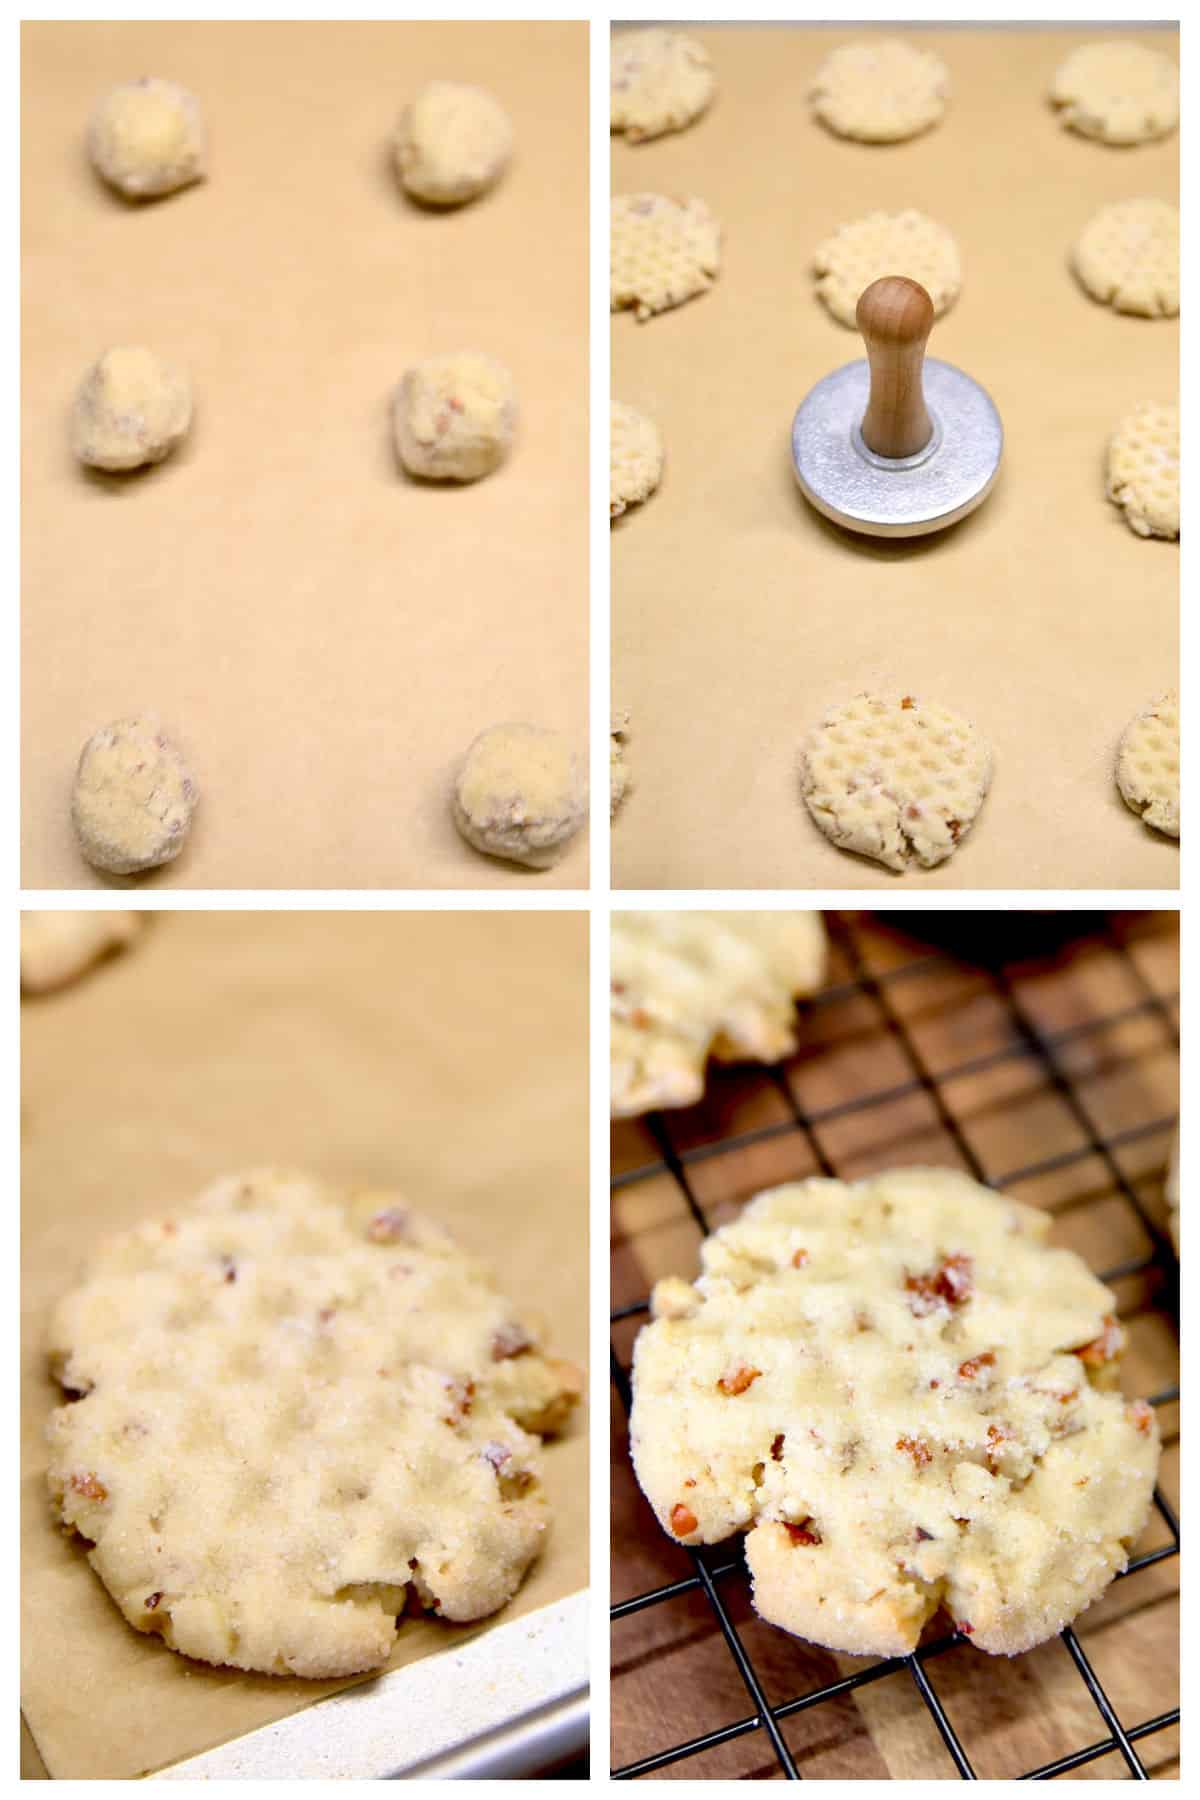 Collage: Pecan sandies cookie dough, smashed, baked, on wire rack.